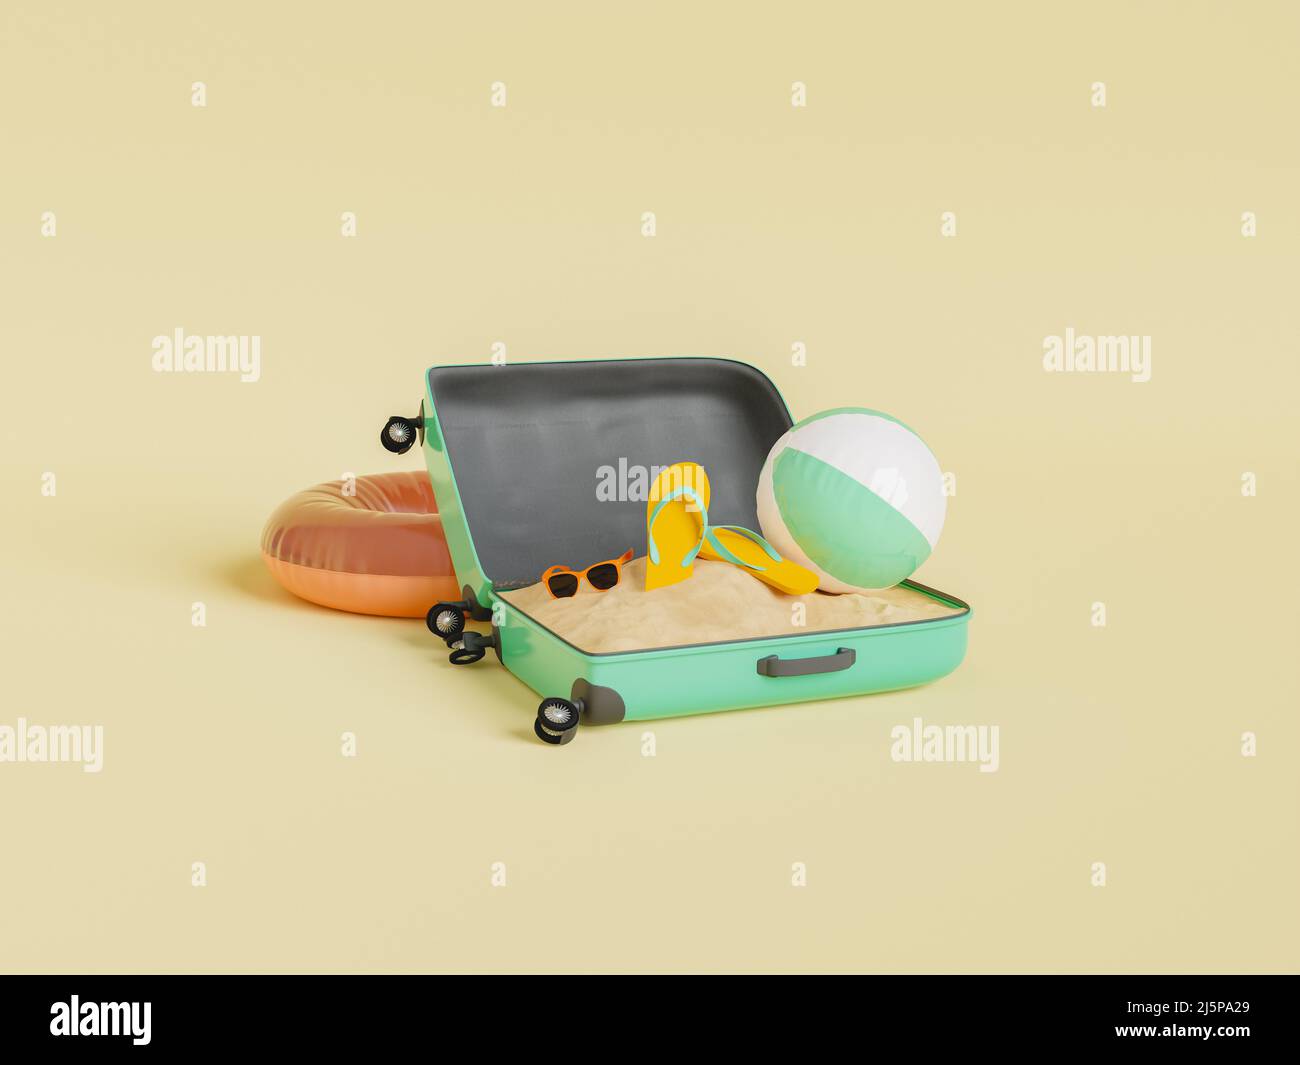 Opened green luggage with flip flops and ball on sand placed on yellow background with inflatable orange ring during summer vacation. 3d rendering Stock Photo